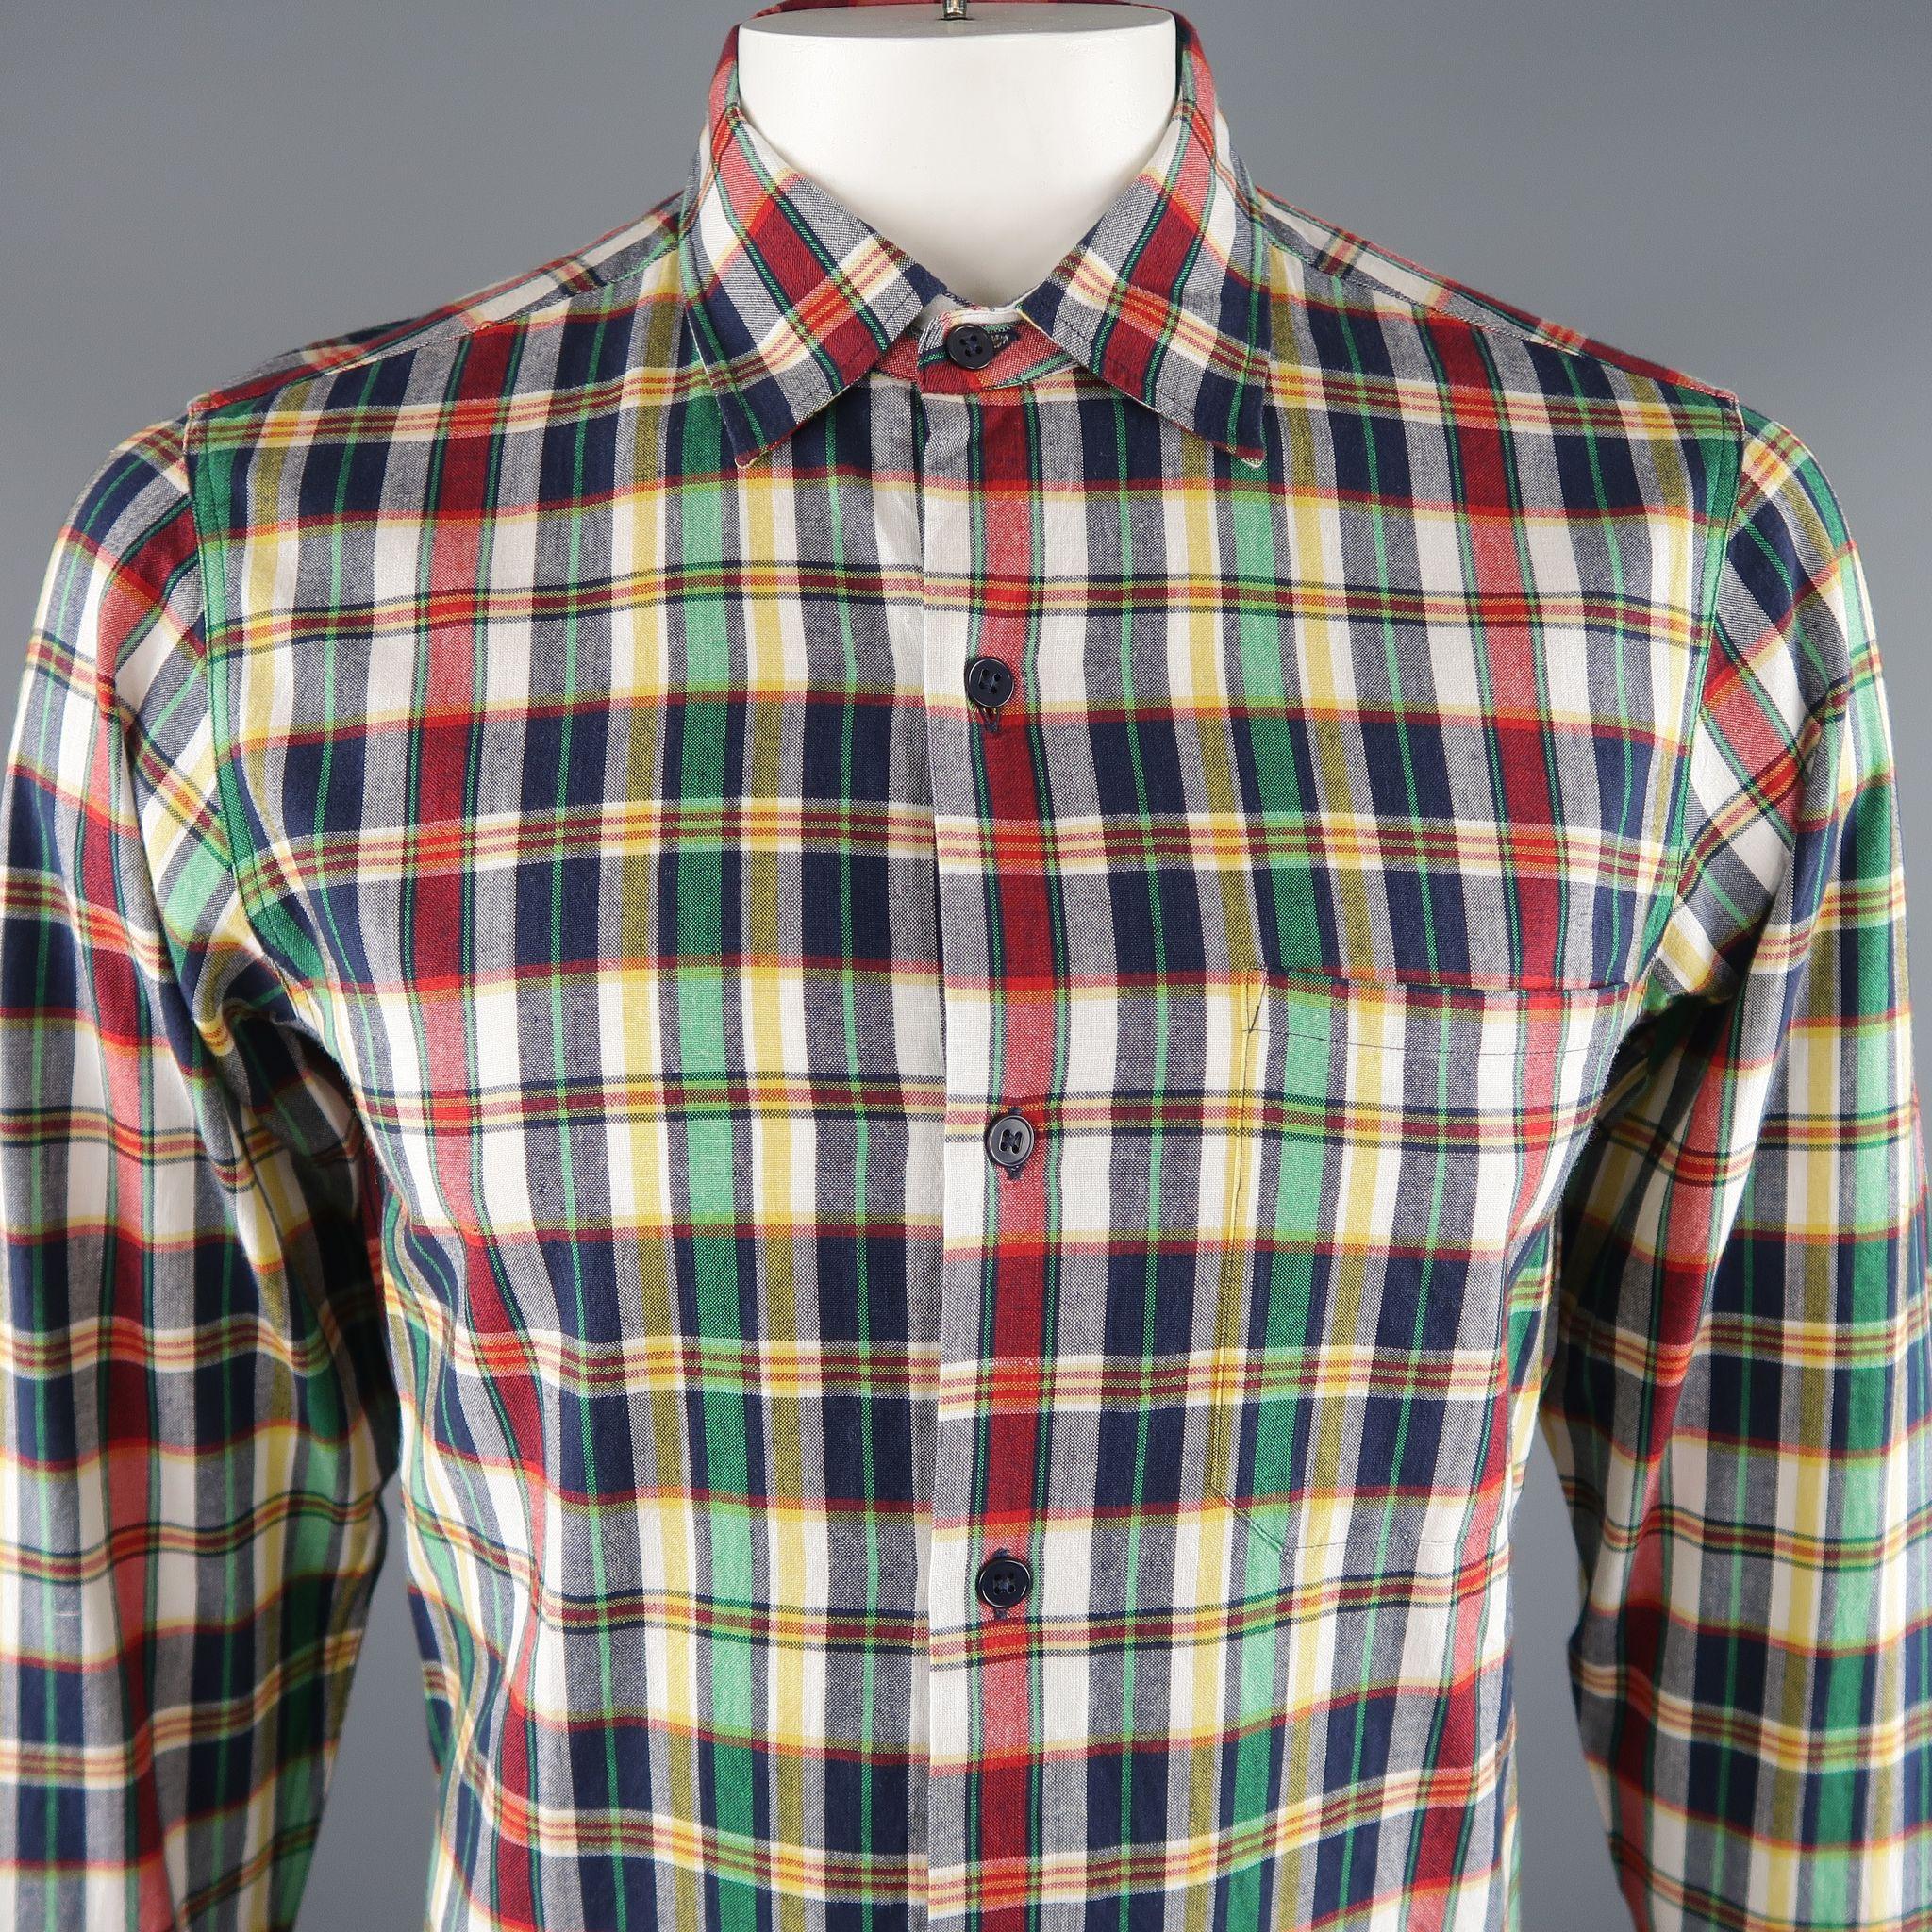 AGNES B. Long Sleeve Shirt comes in multi-color tones in a plaid cotton material, with a patch pocket at front, button up.

Excellent Pre-Owned Condition.
Marked: 38

Measurements:

Shoulder: 15.5 in.
Chest: 41 in.
Sleeve: 26 in.
Length: 32 in.